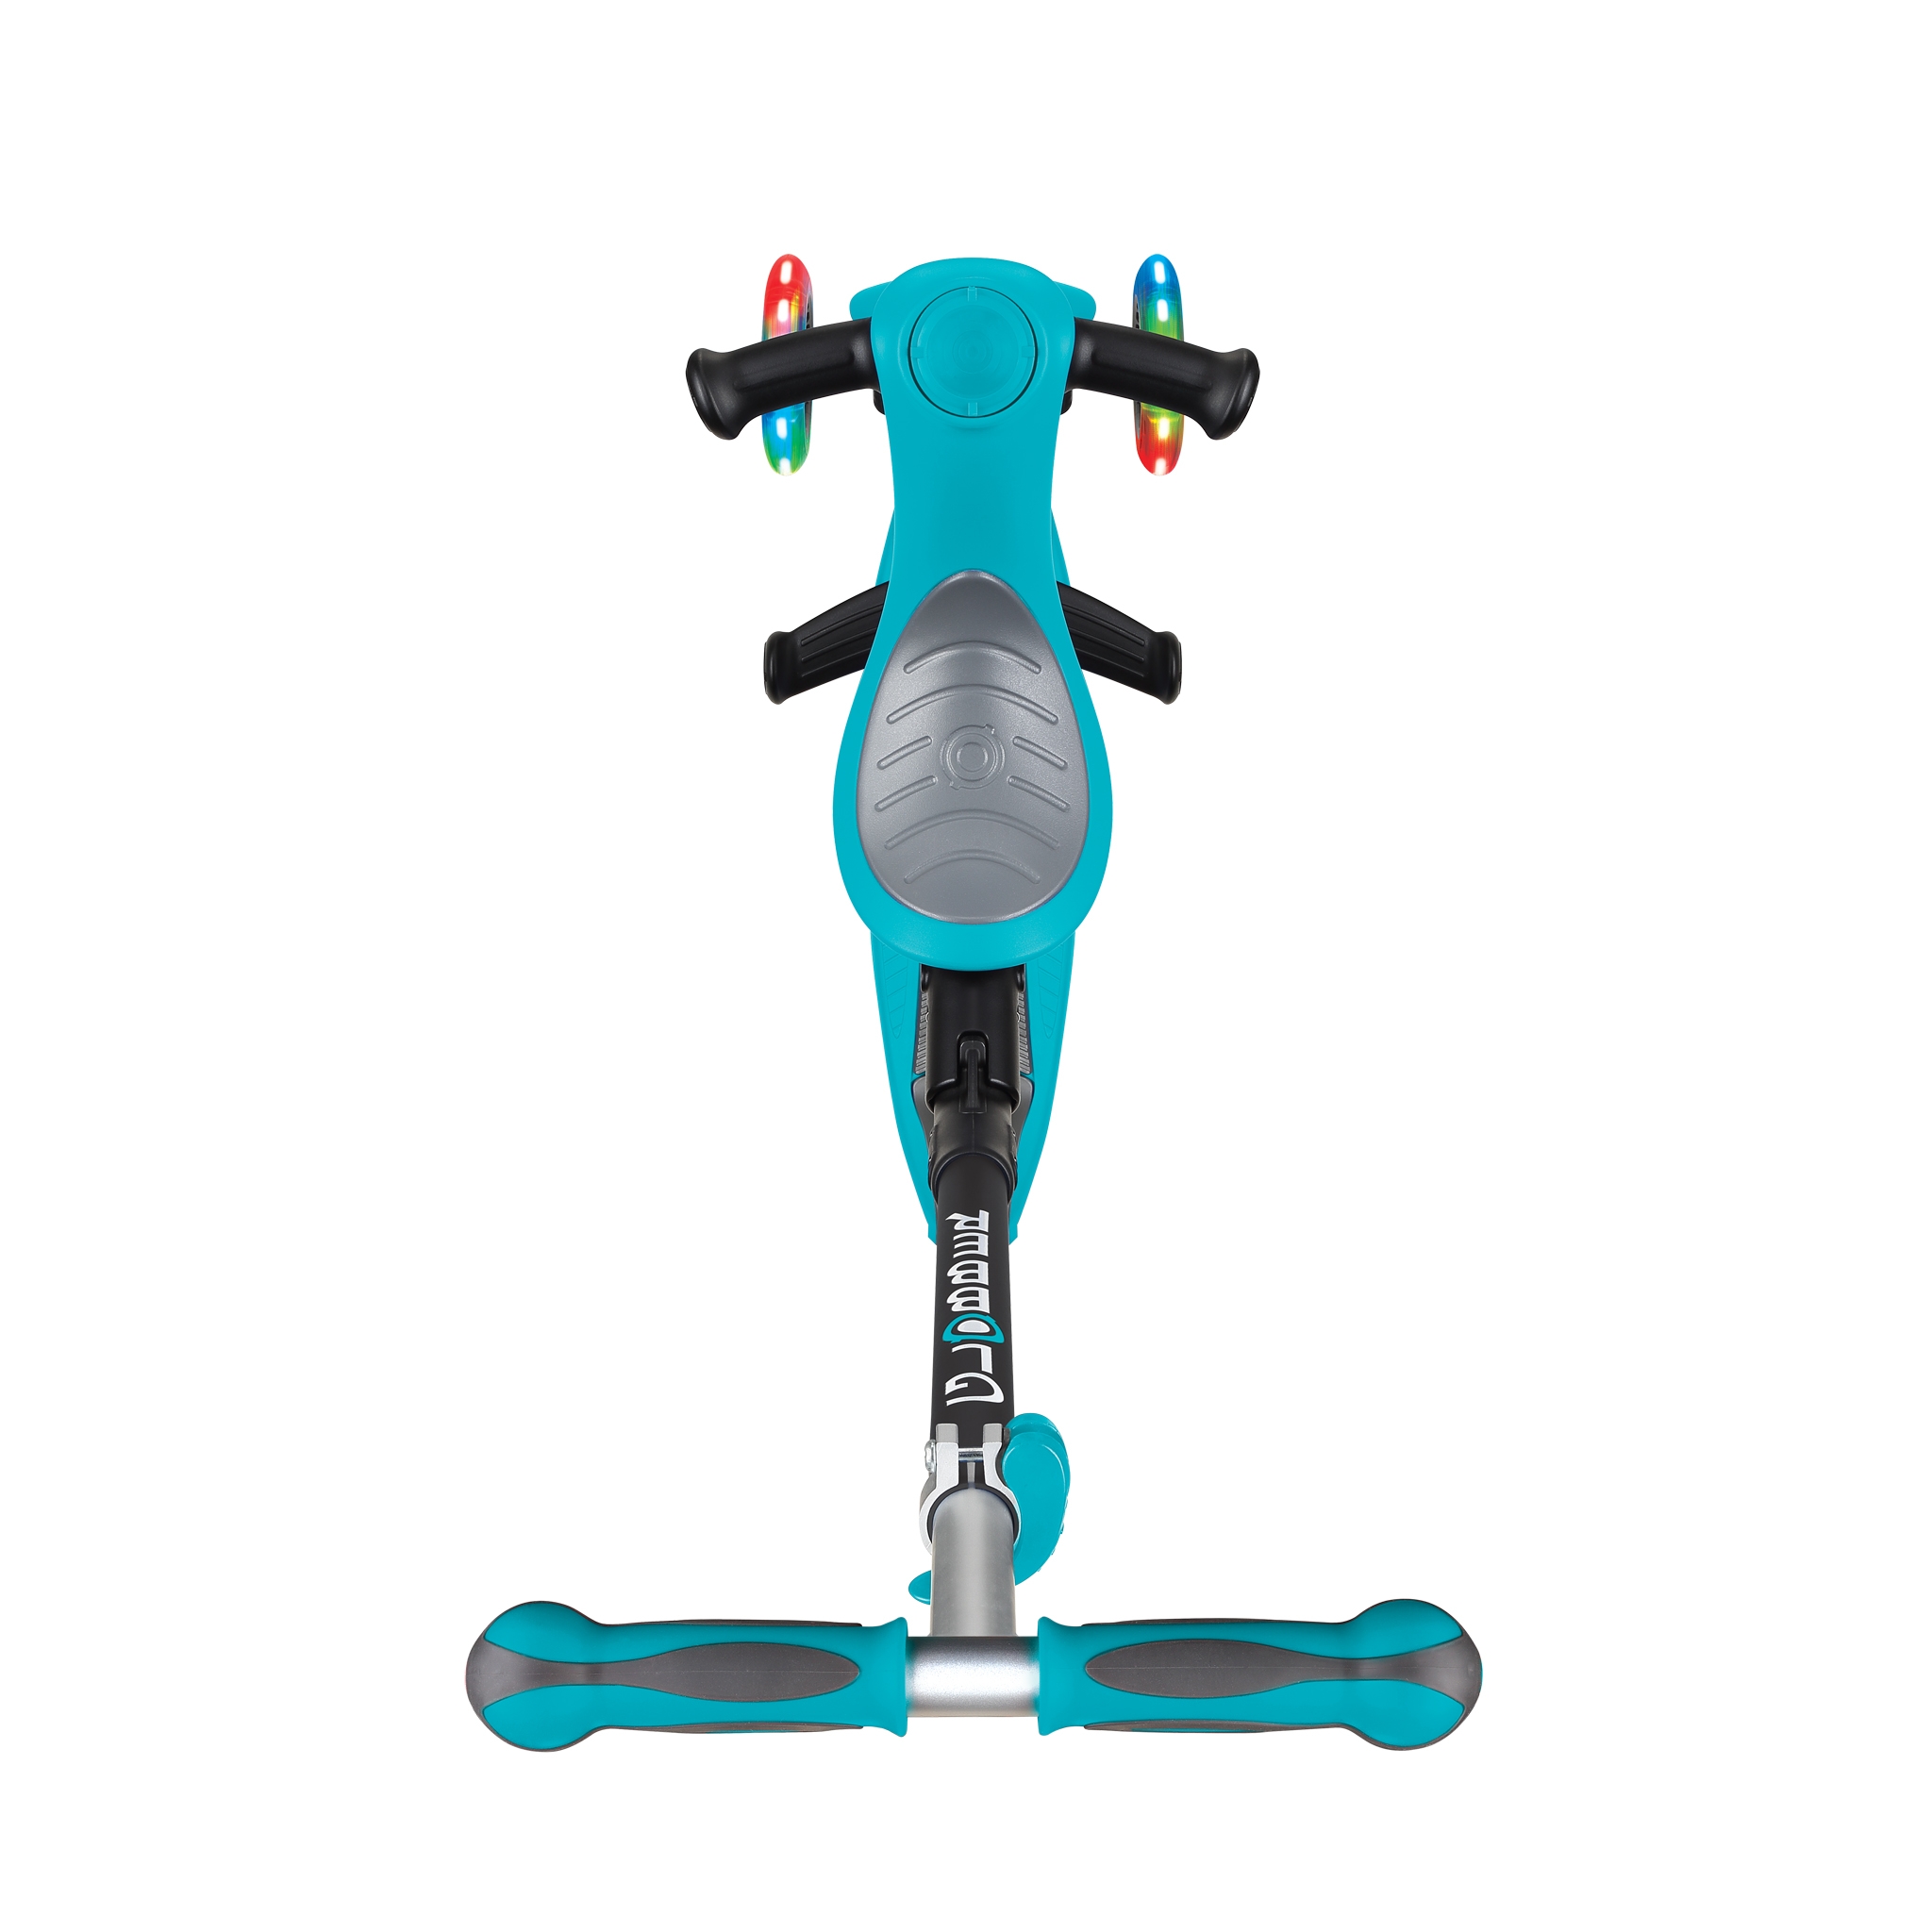 GO-UP-DELUXE-LIGHTS-ride-on-walking-bike-scooter-with-light-up-wheels-and-extra-wide-3-height-adjustable-seat-teal 2